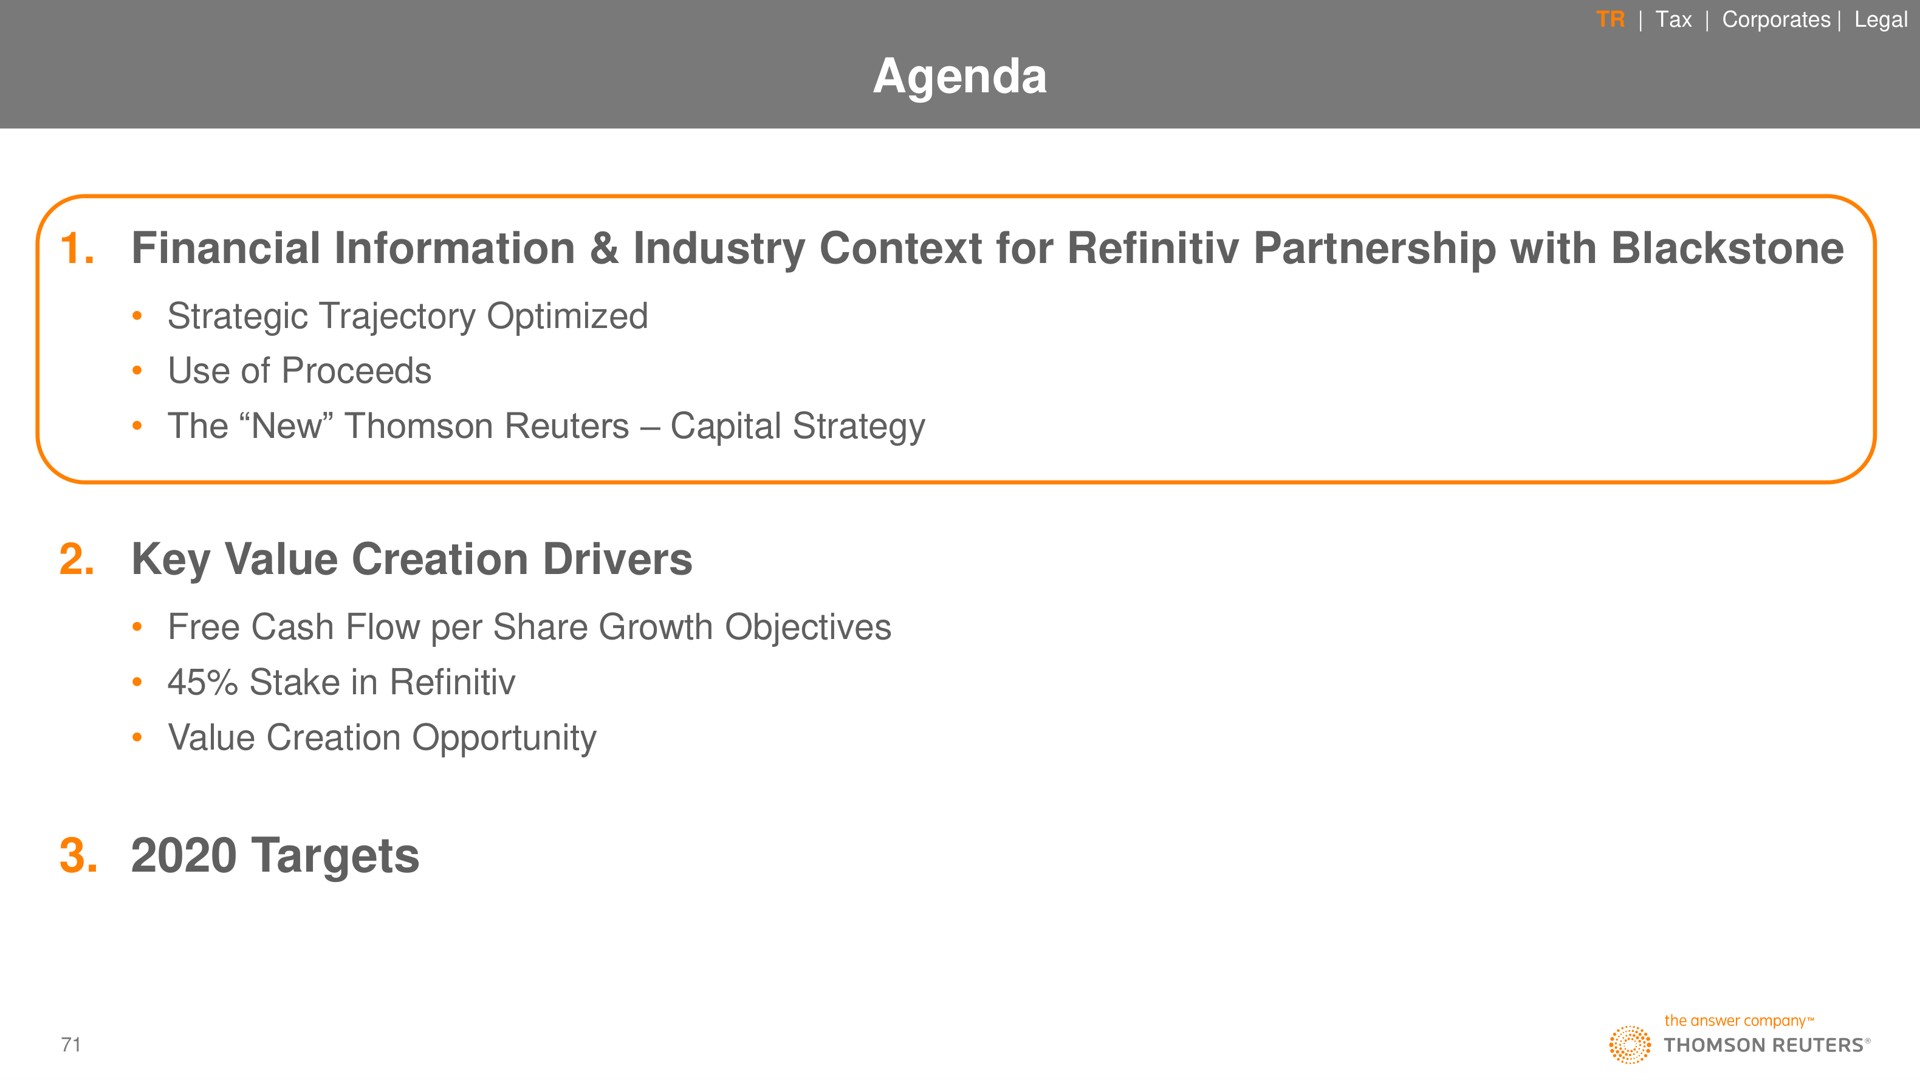 agenda financial information industry context for partnership with key value creation drivers targets | Thomson Reuters